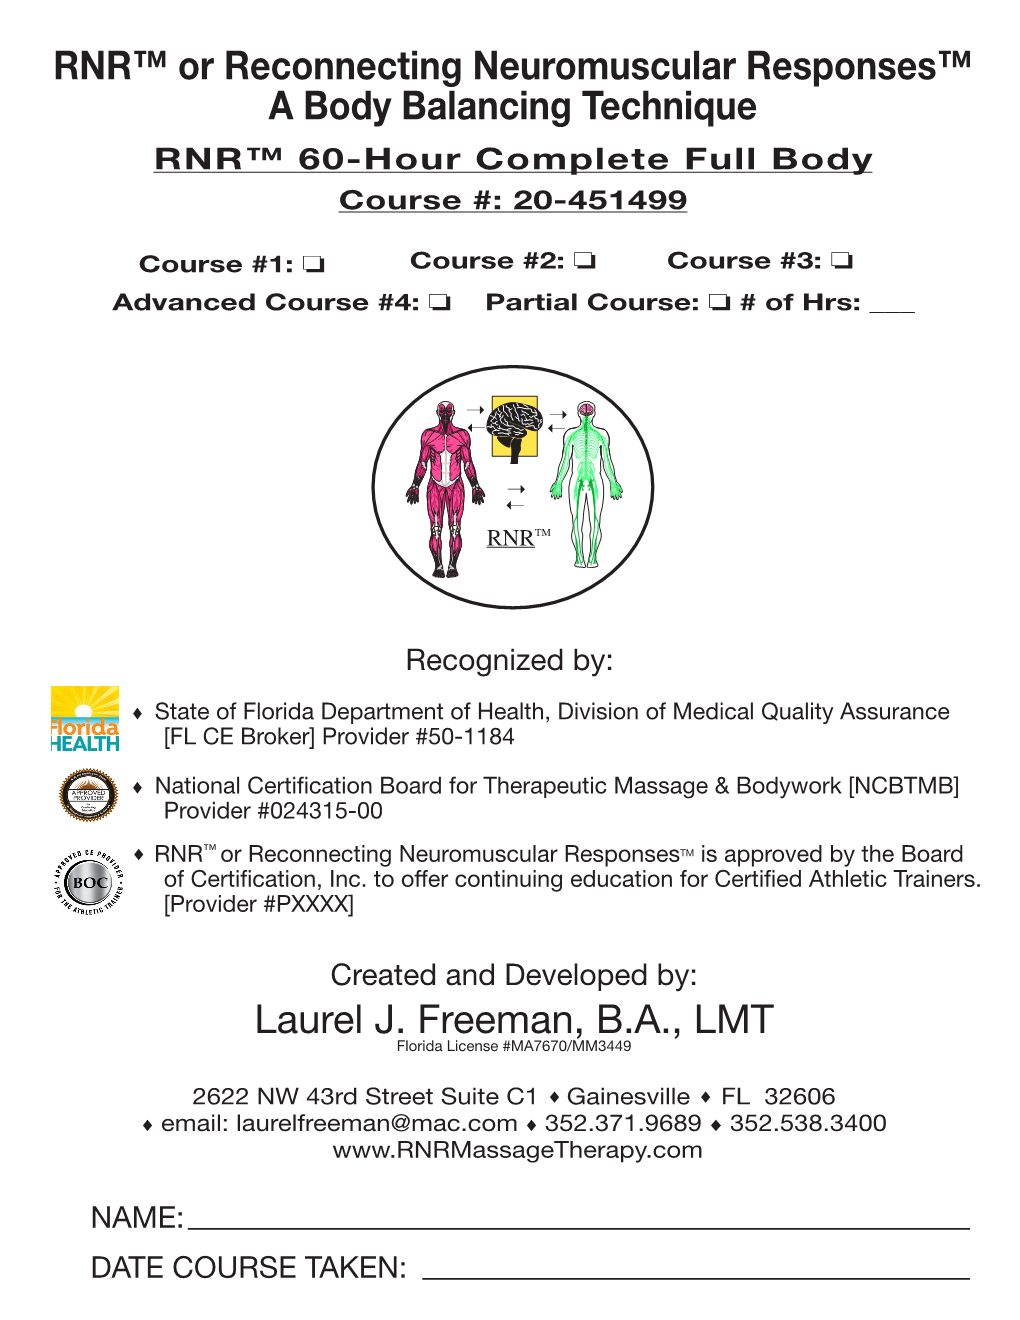 RNR Massage Therapy